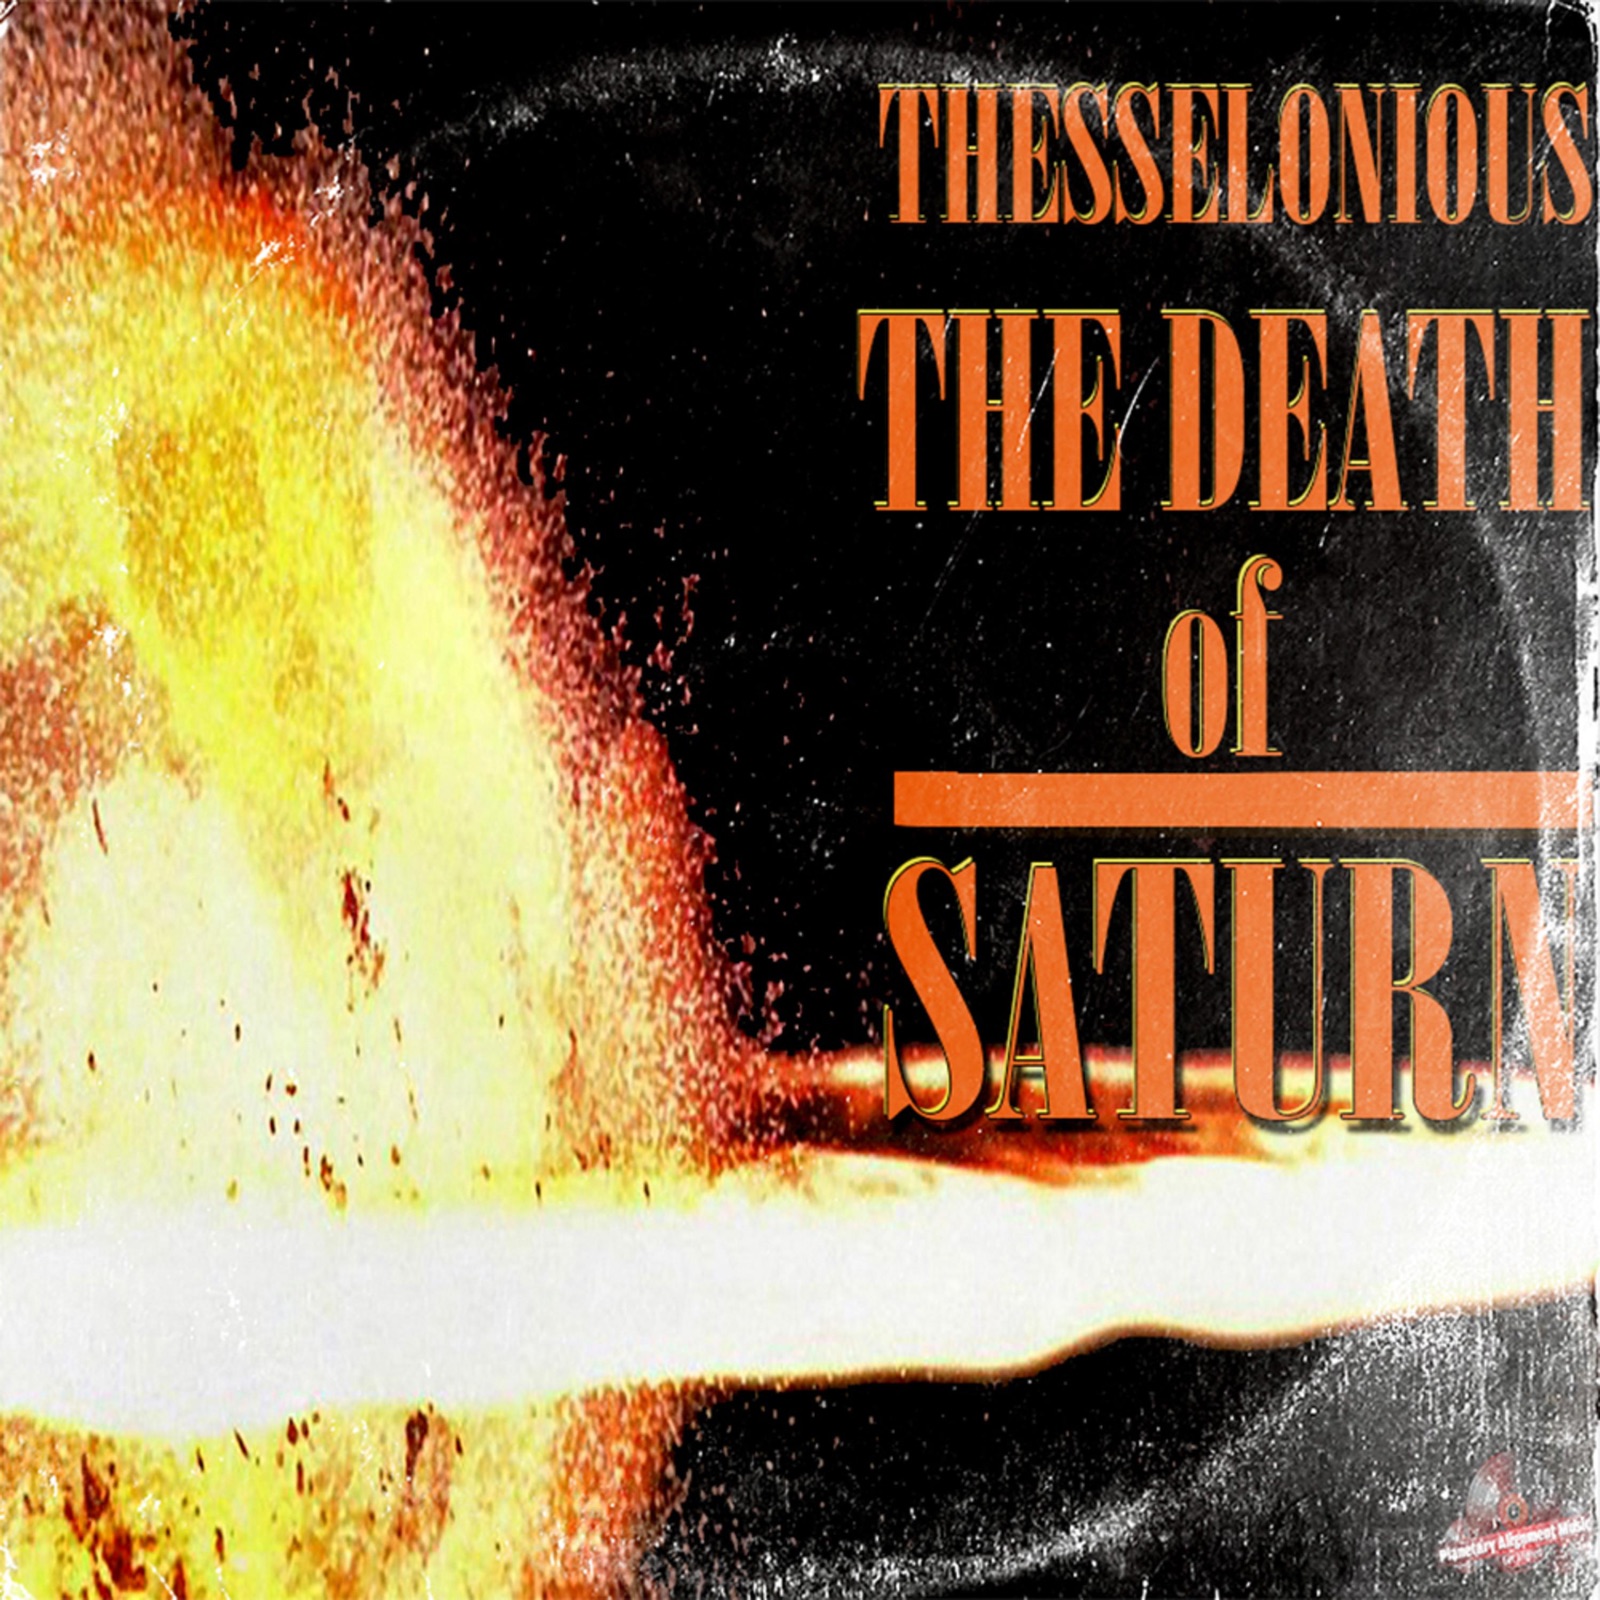 The Death of Saturn